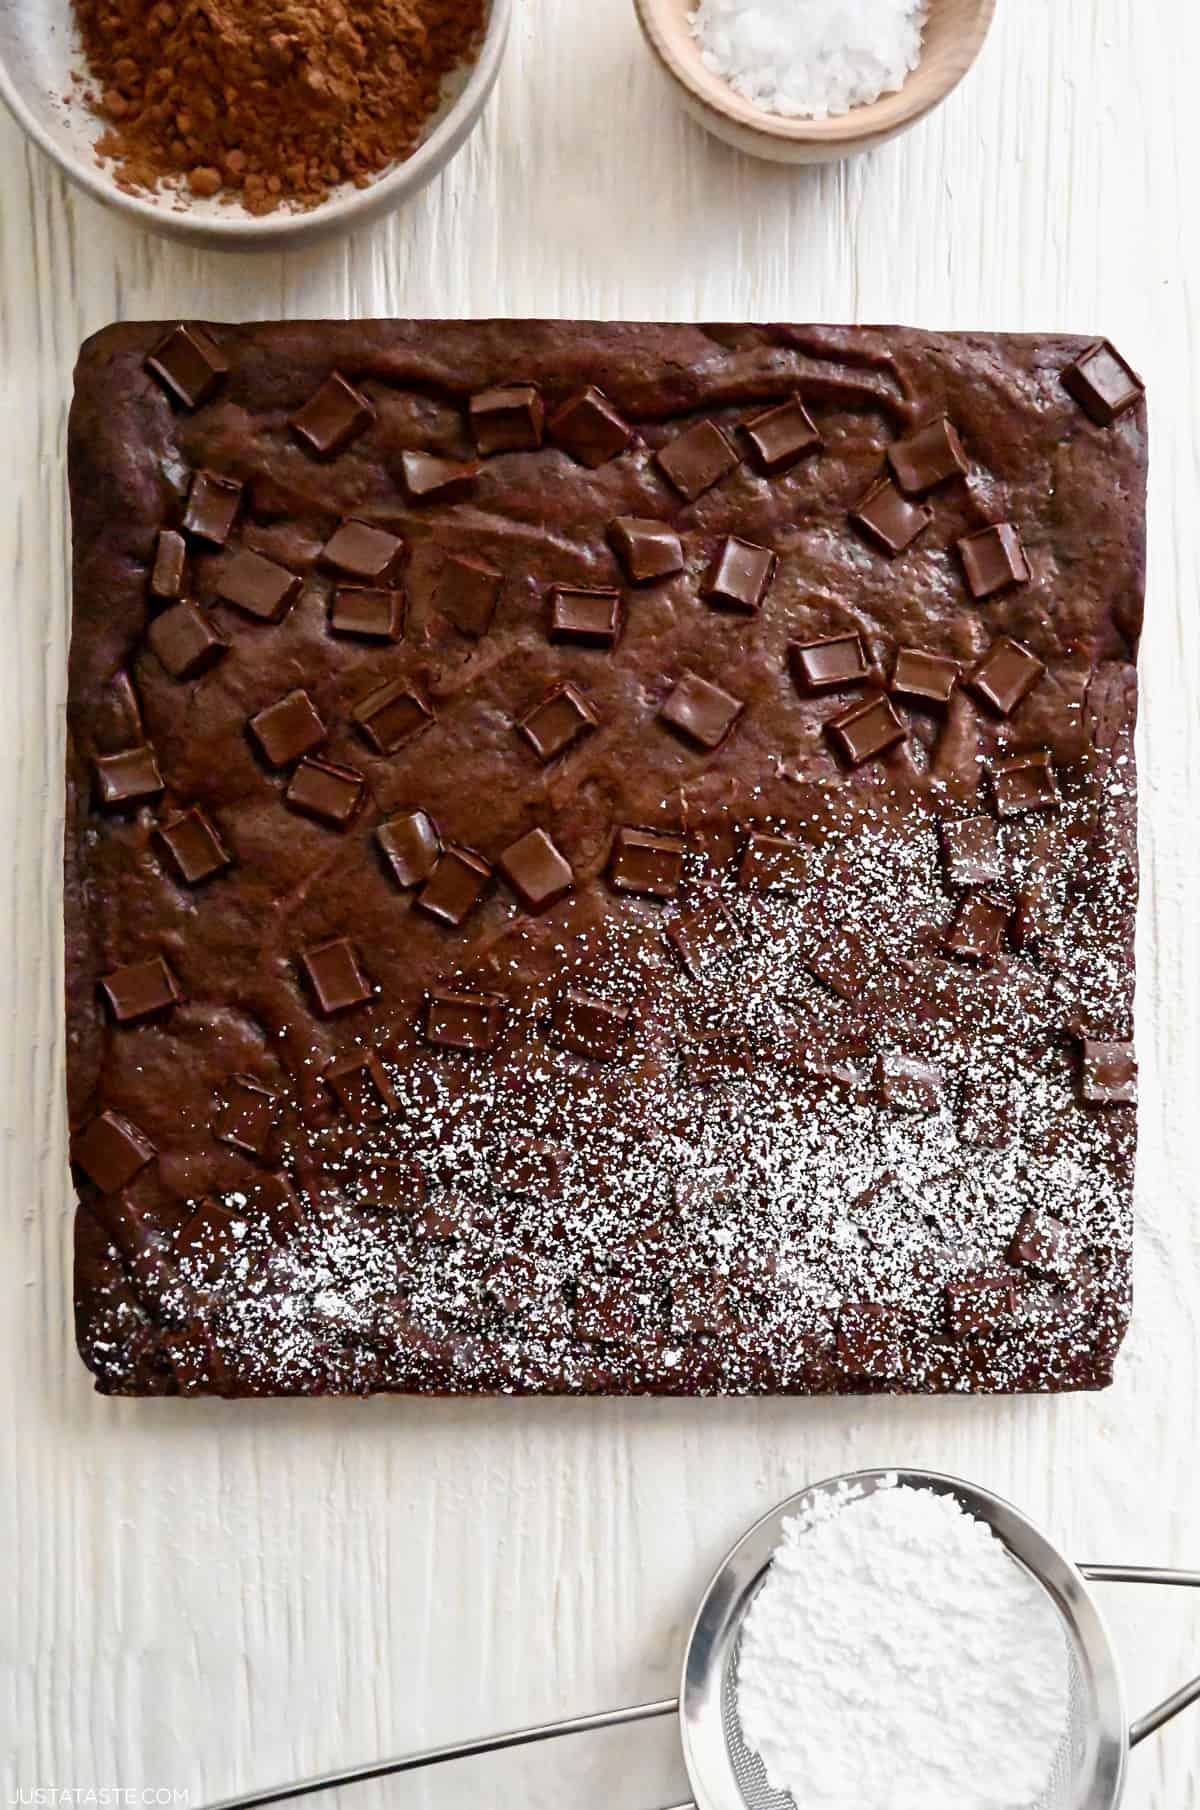 An uncut square brownie with chocolate chunks that's half dusted with powdered sugar.